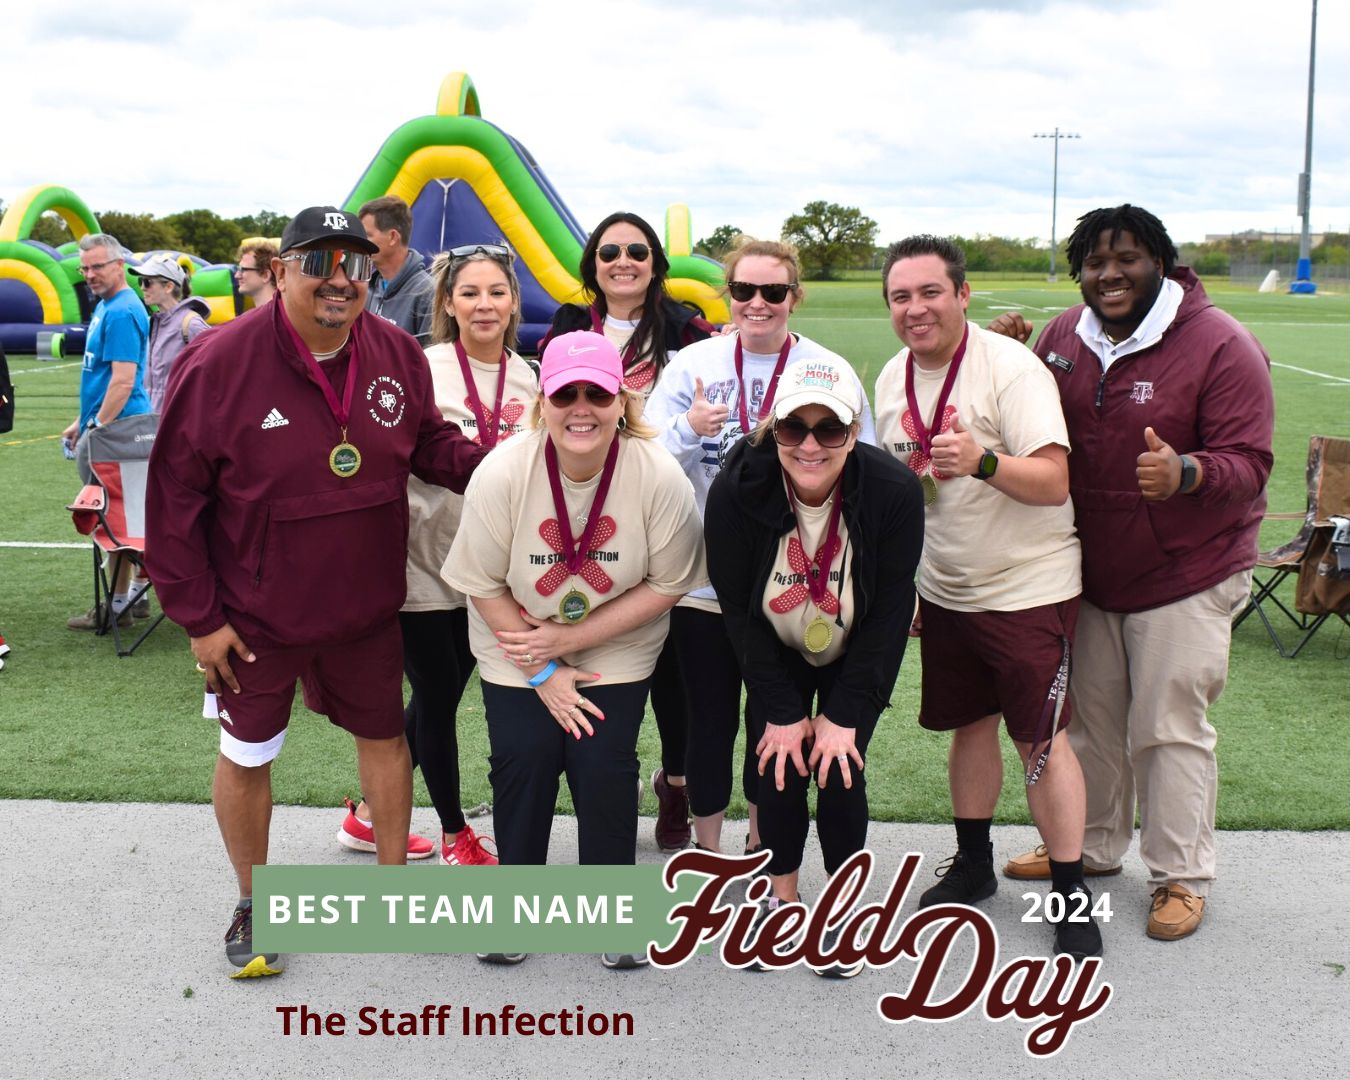 The Staff Infection team posing at Field Day 2024